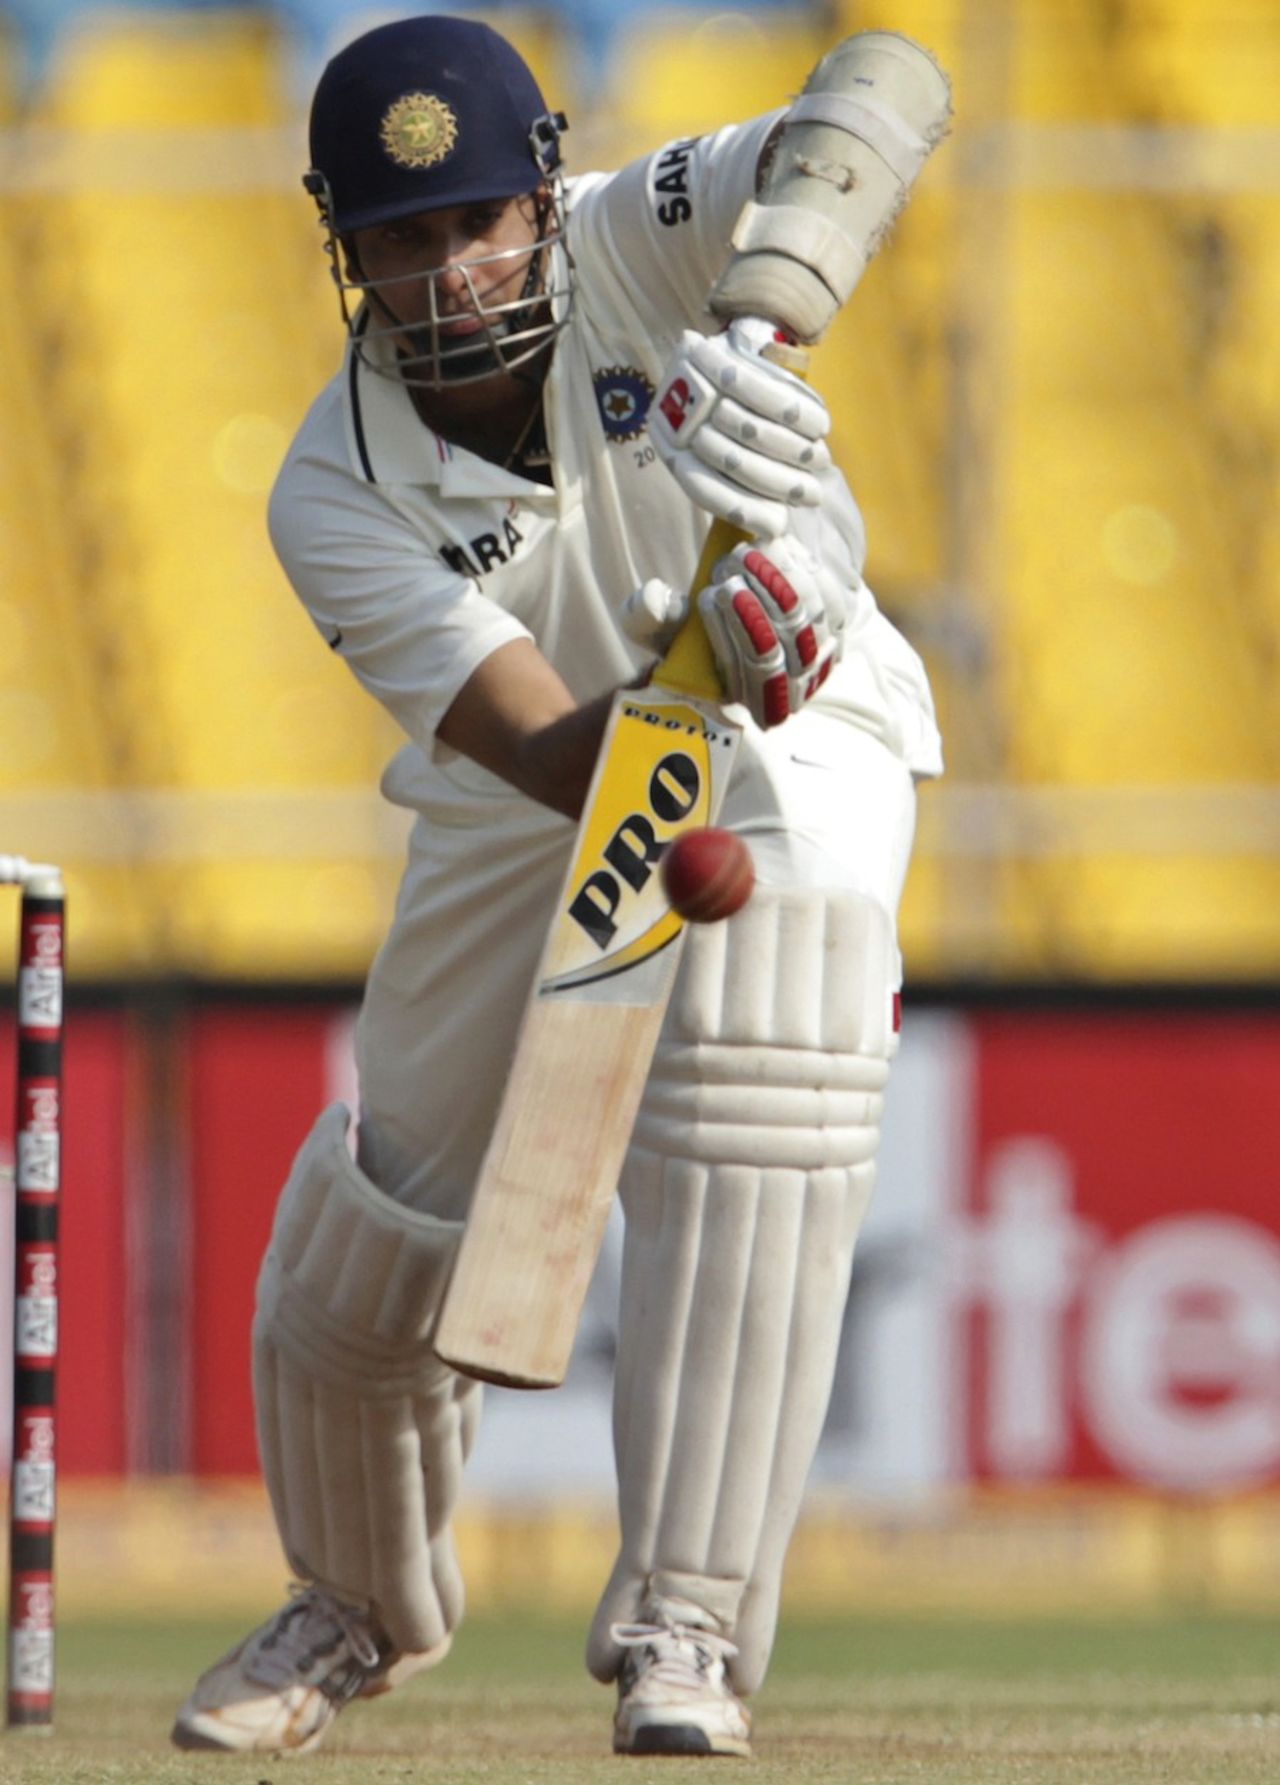 VVS Laxman made a vital second-innings contribution once again for India, India v New Zealand, 1st Test, Ahmedabad, 5th day, November 8, 2010